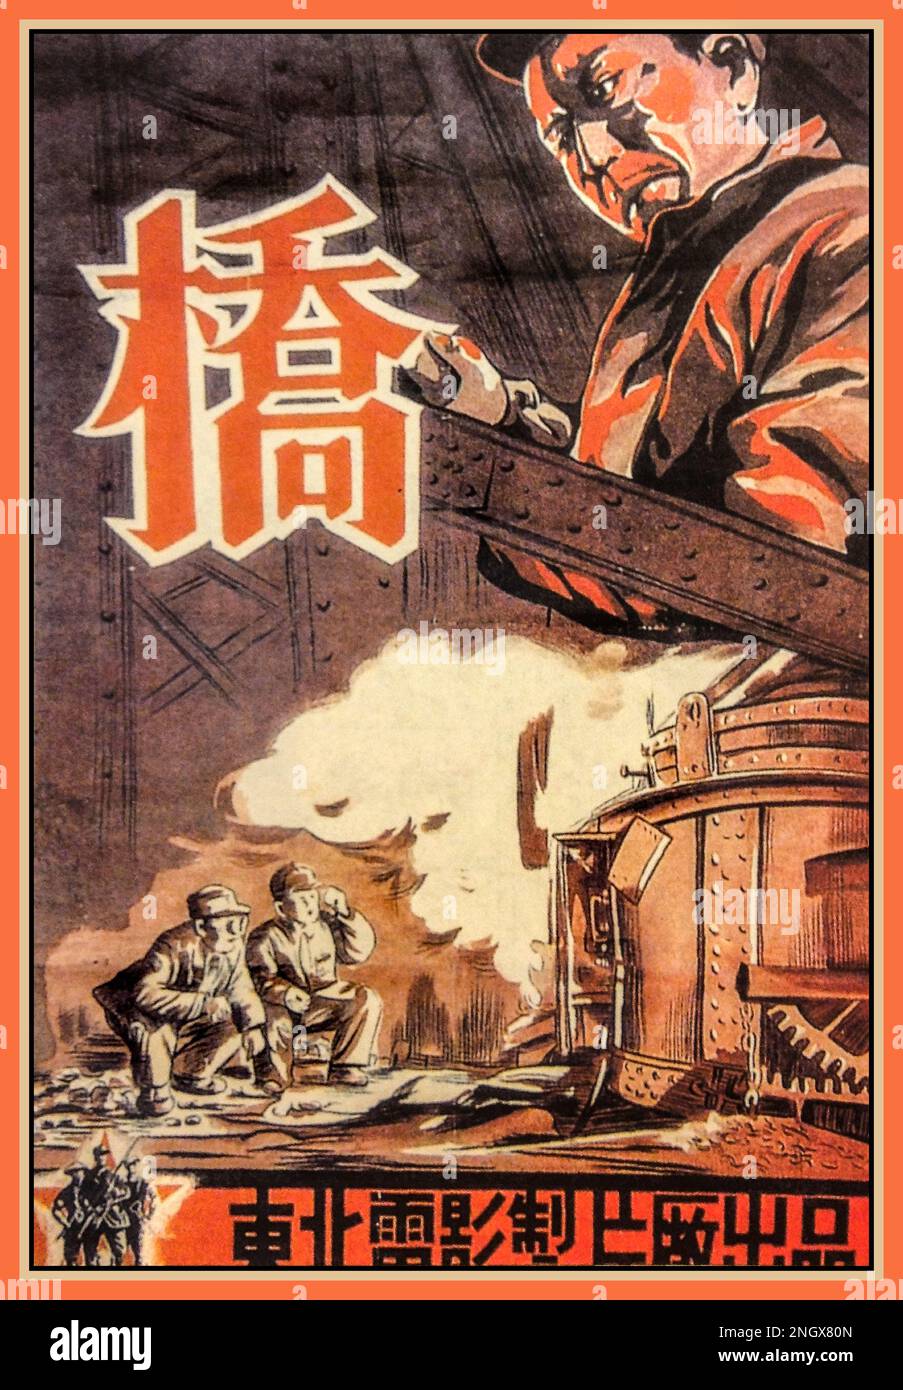 Vintage Chinese 'The Bridge', movie poster, 1949. People's Republic of China (PRC). A war film made shortly after the Communist revolution; considered the first film completed after the founding of the PRC. 'The Bridge' set many of the themes that would dominate the communist cinema of post-1949 China, including the glorification of the worker and the conversion of the intellectual to communism. Stock Photo